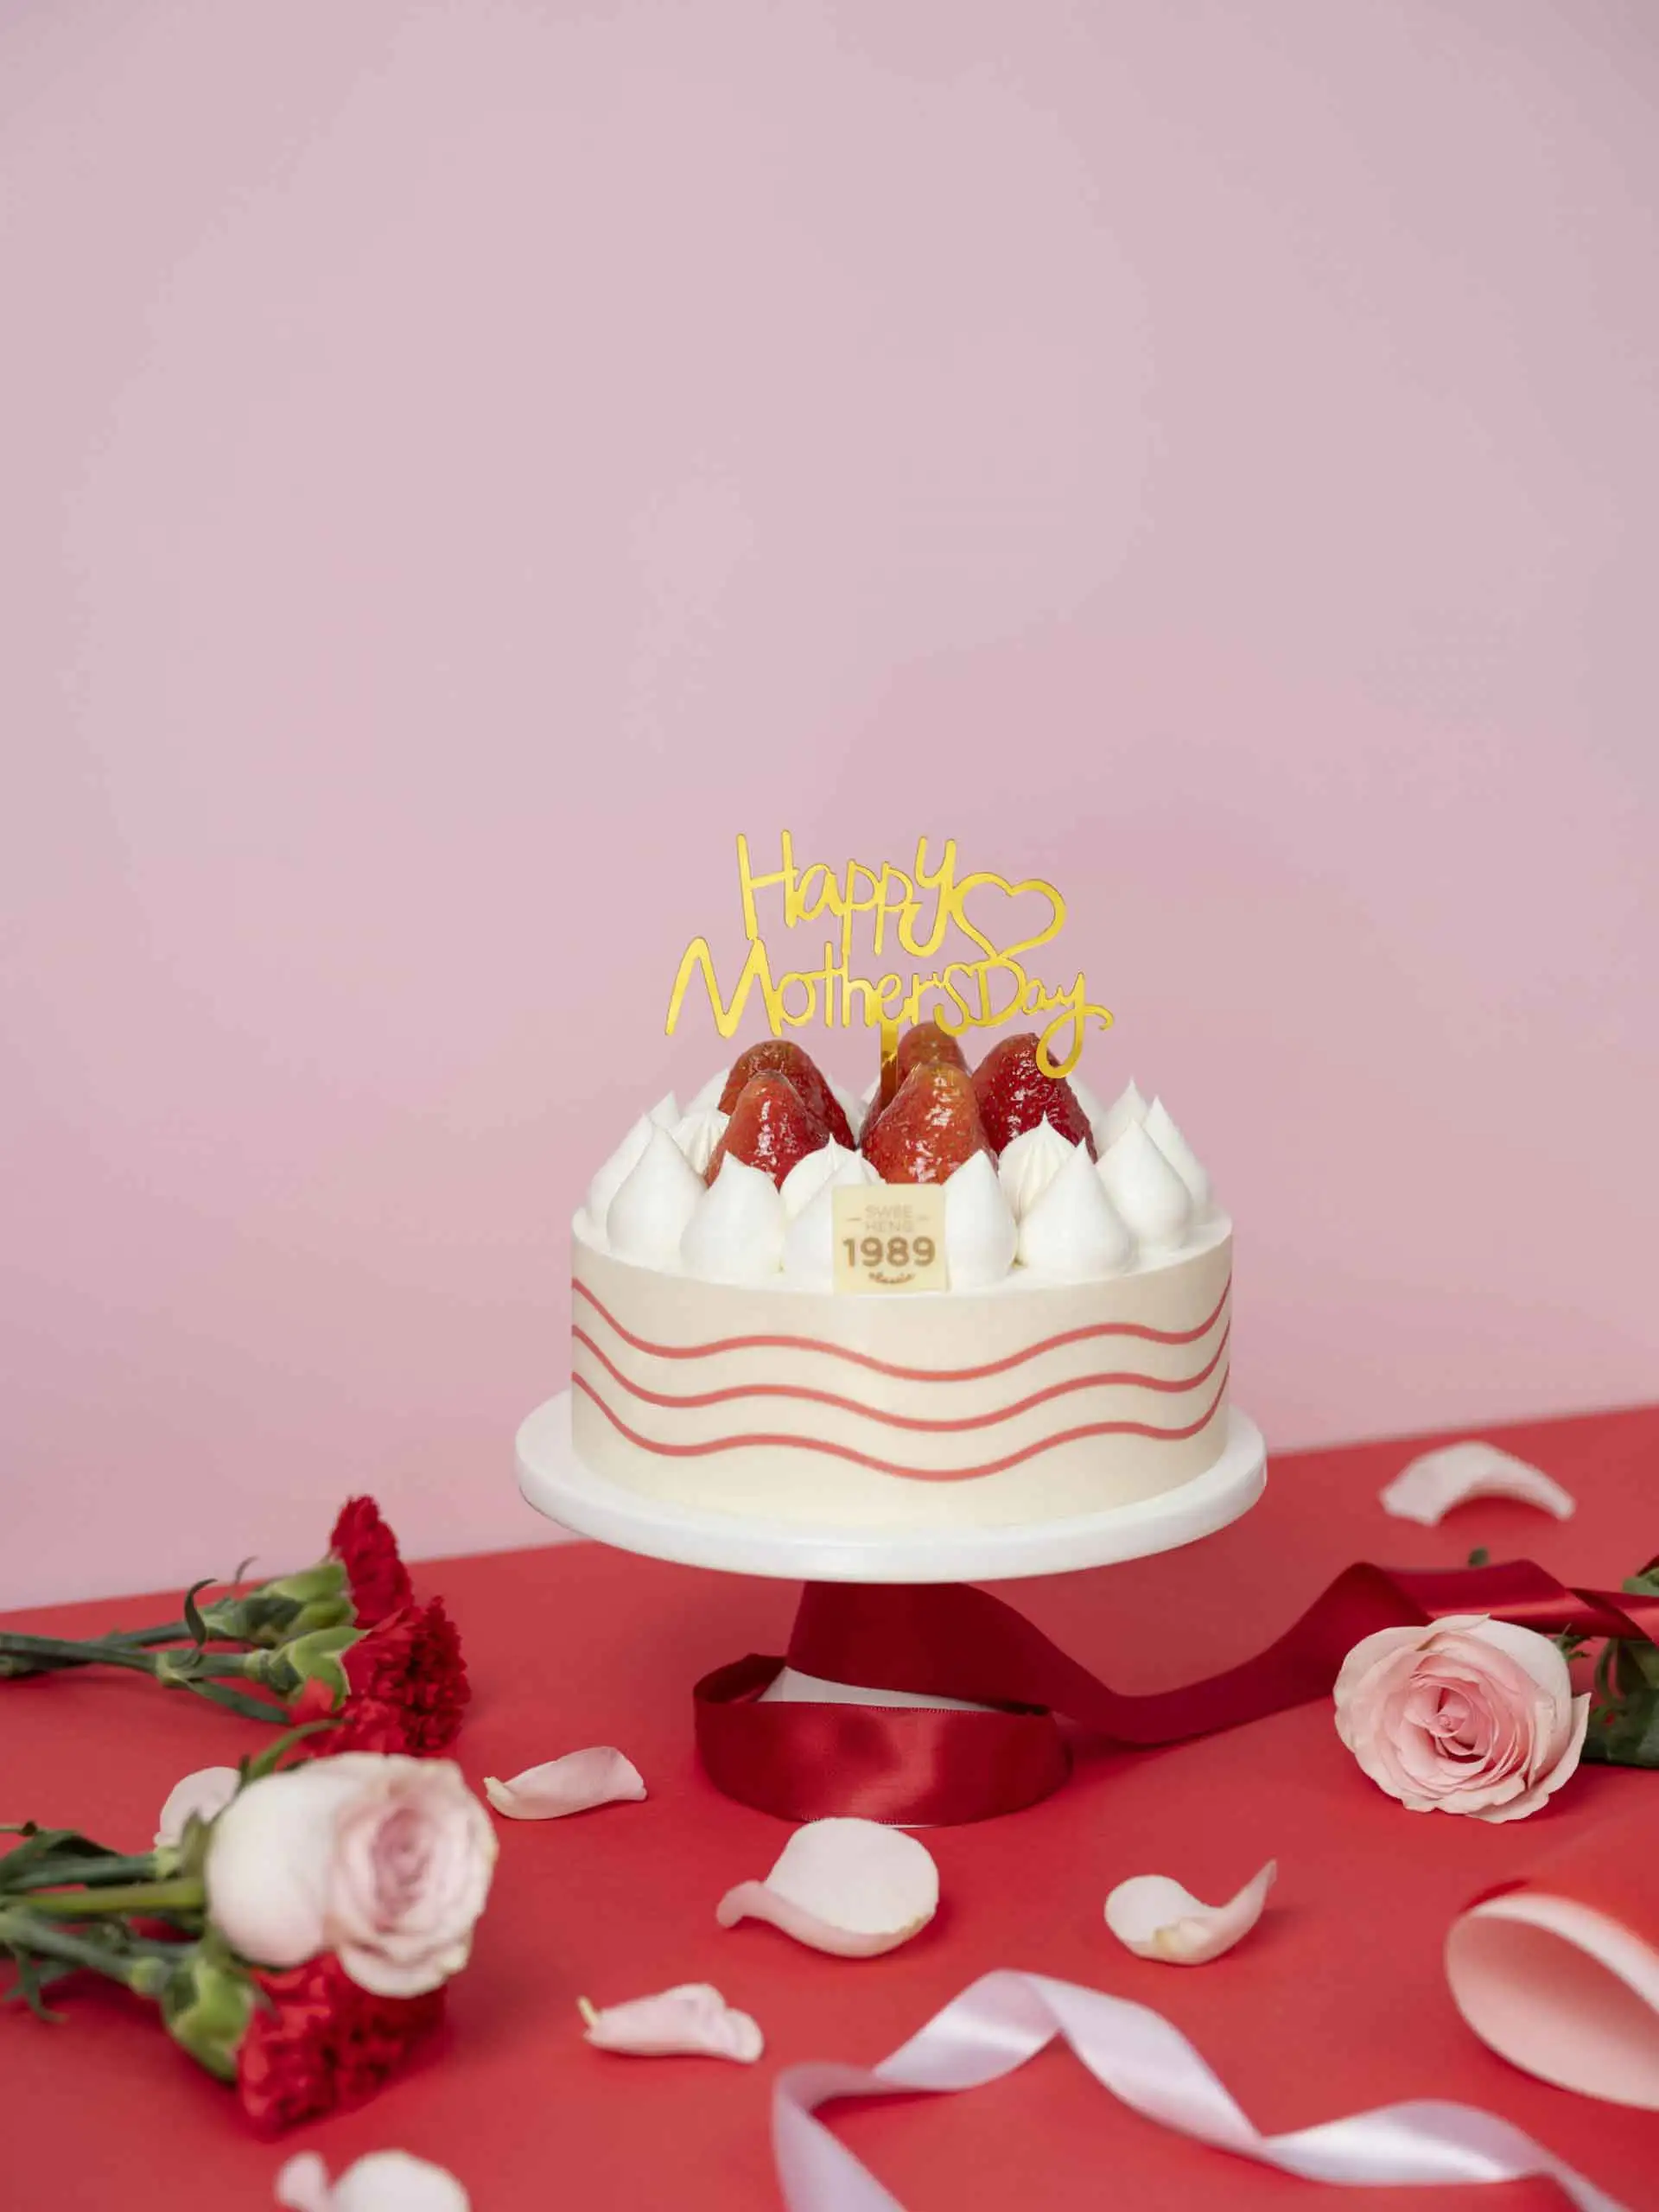 Food-bakery-photography-services-photographer-singapore-Elle-Vire-Swee-Heng-cake-dessert-1-scaled